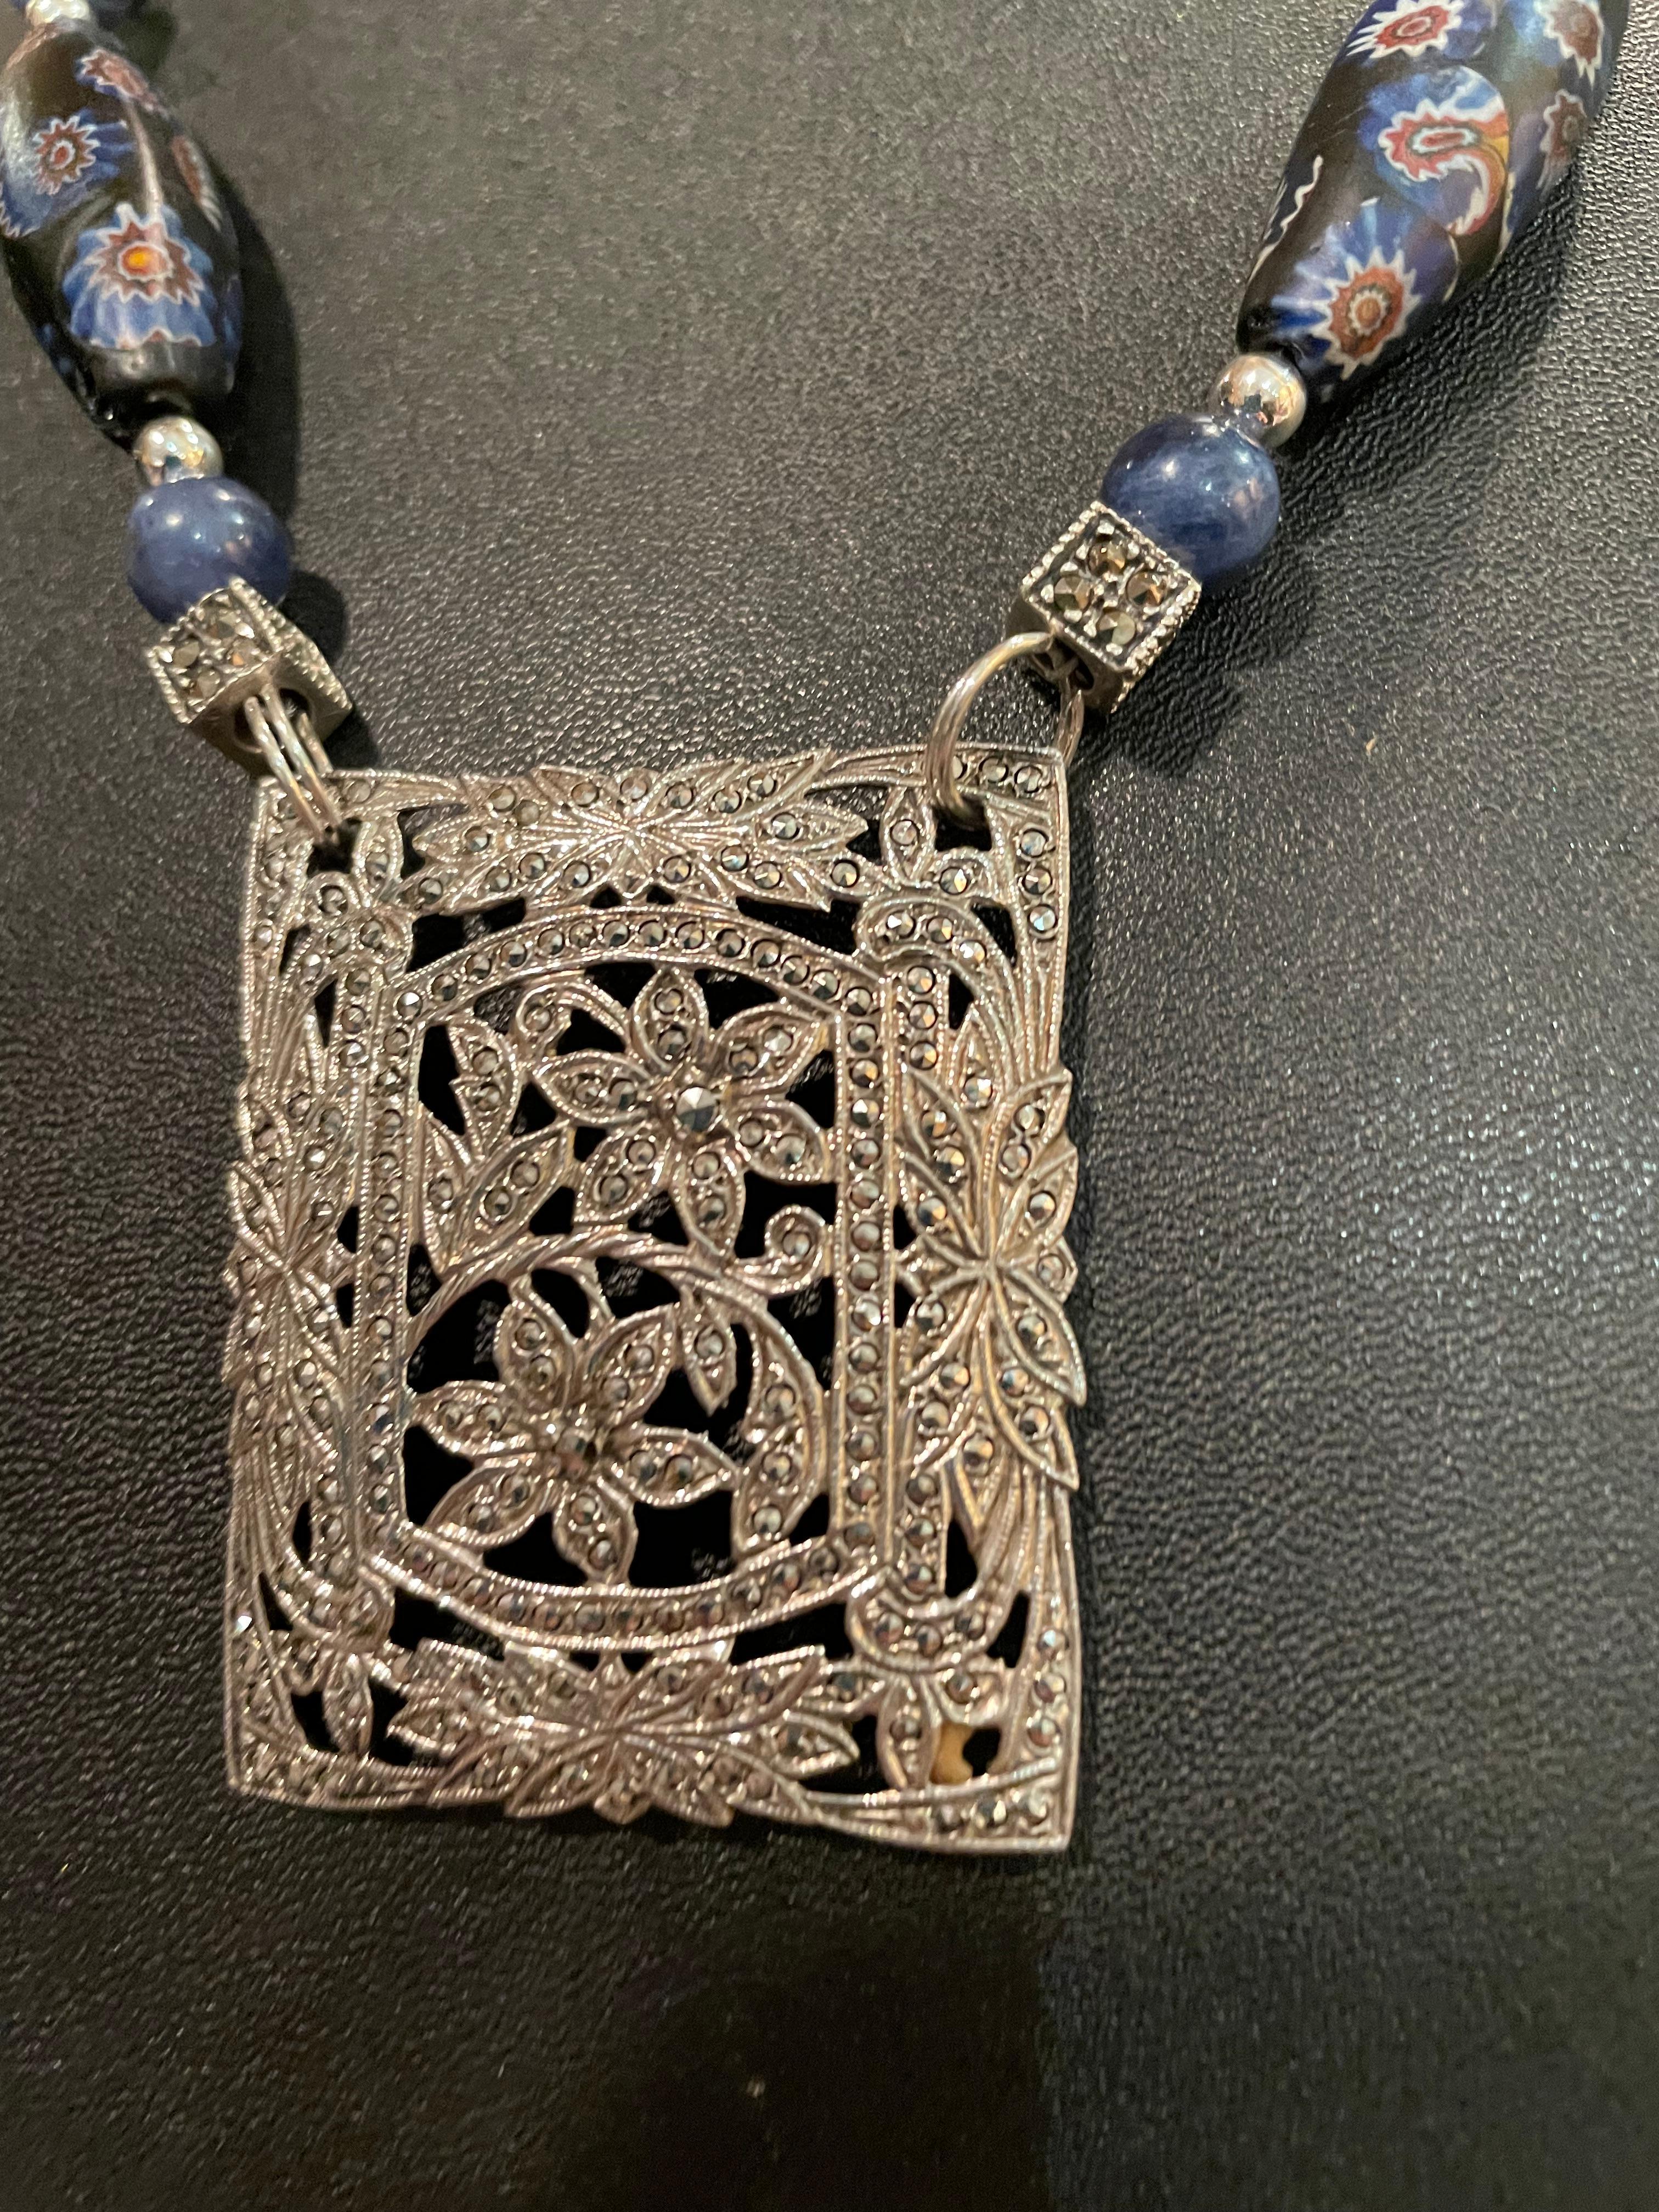 Lorraine’s Bijoux offers a Stunning Vintage Sterling Silver and Marcasite, filigree pendant that is large and impressive. The size and sparkle make it outstanding and the lapis, vintage Venetian glass, and Rock Crystal make this necklace a real